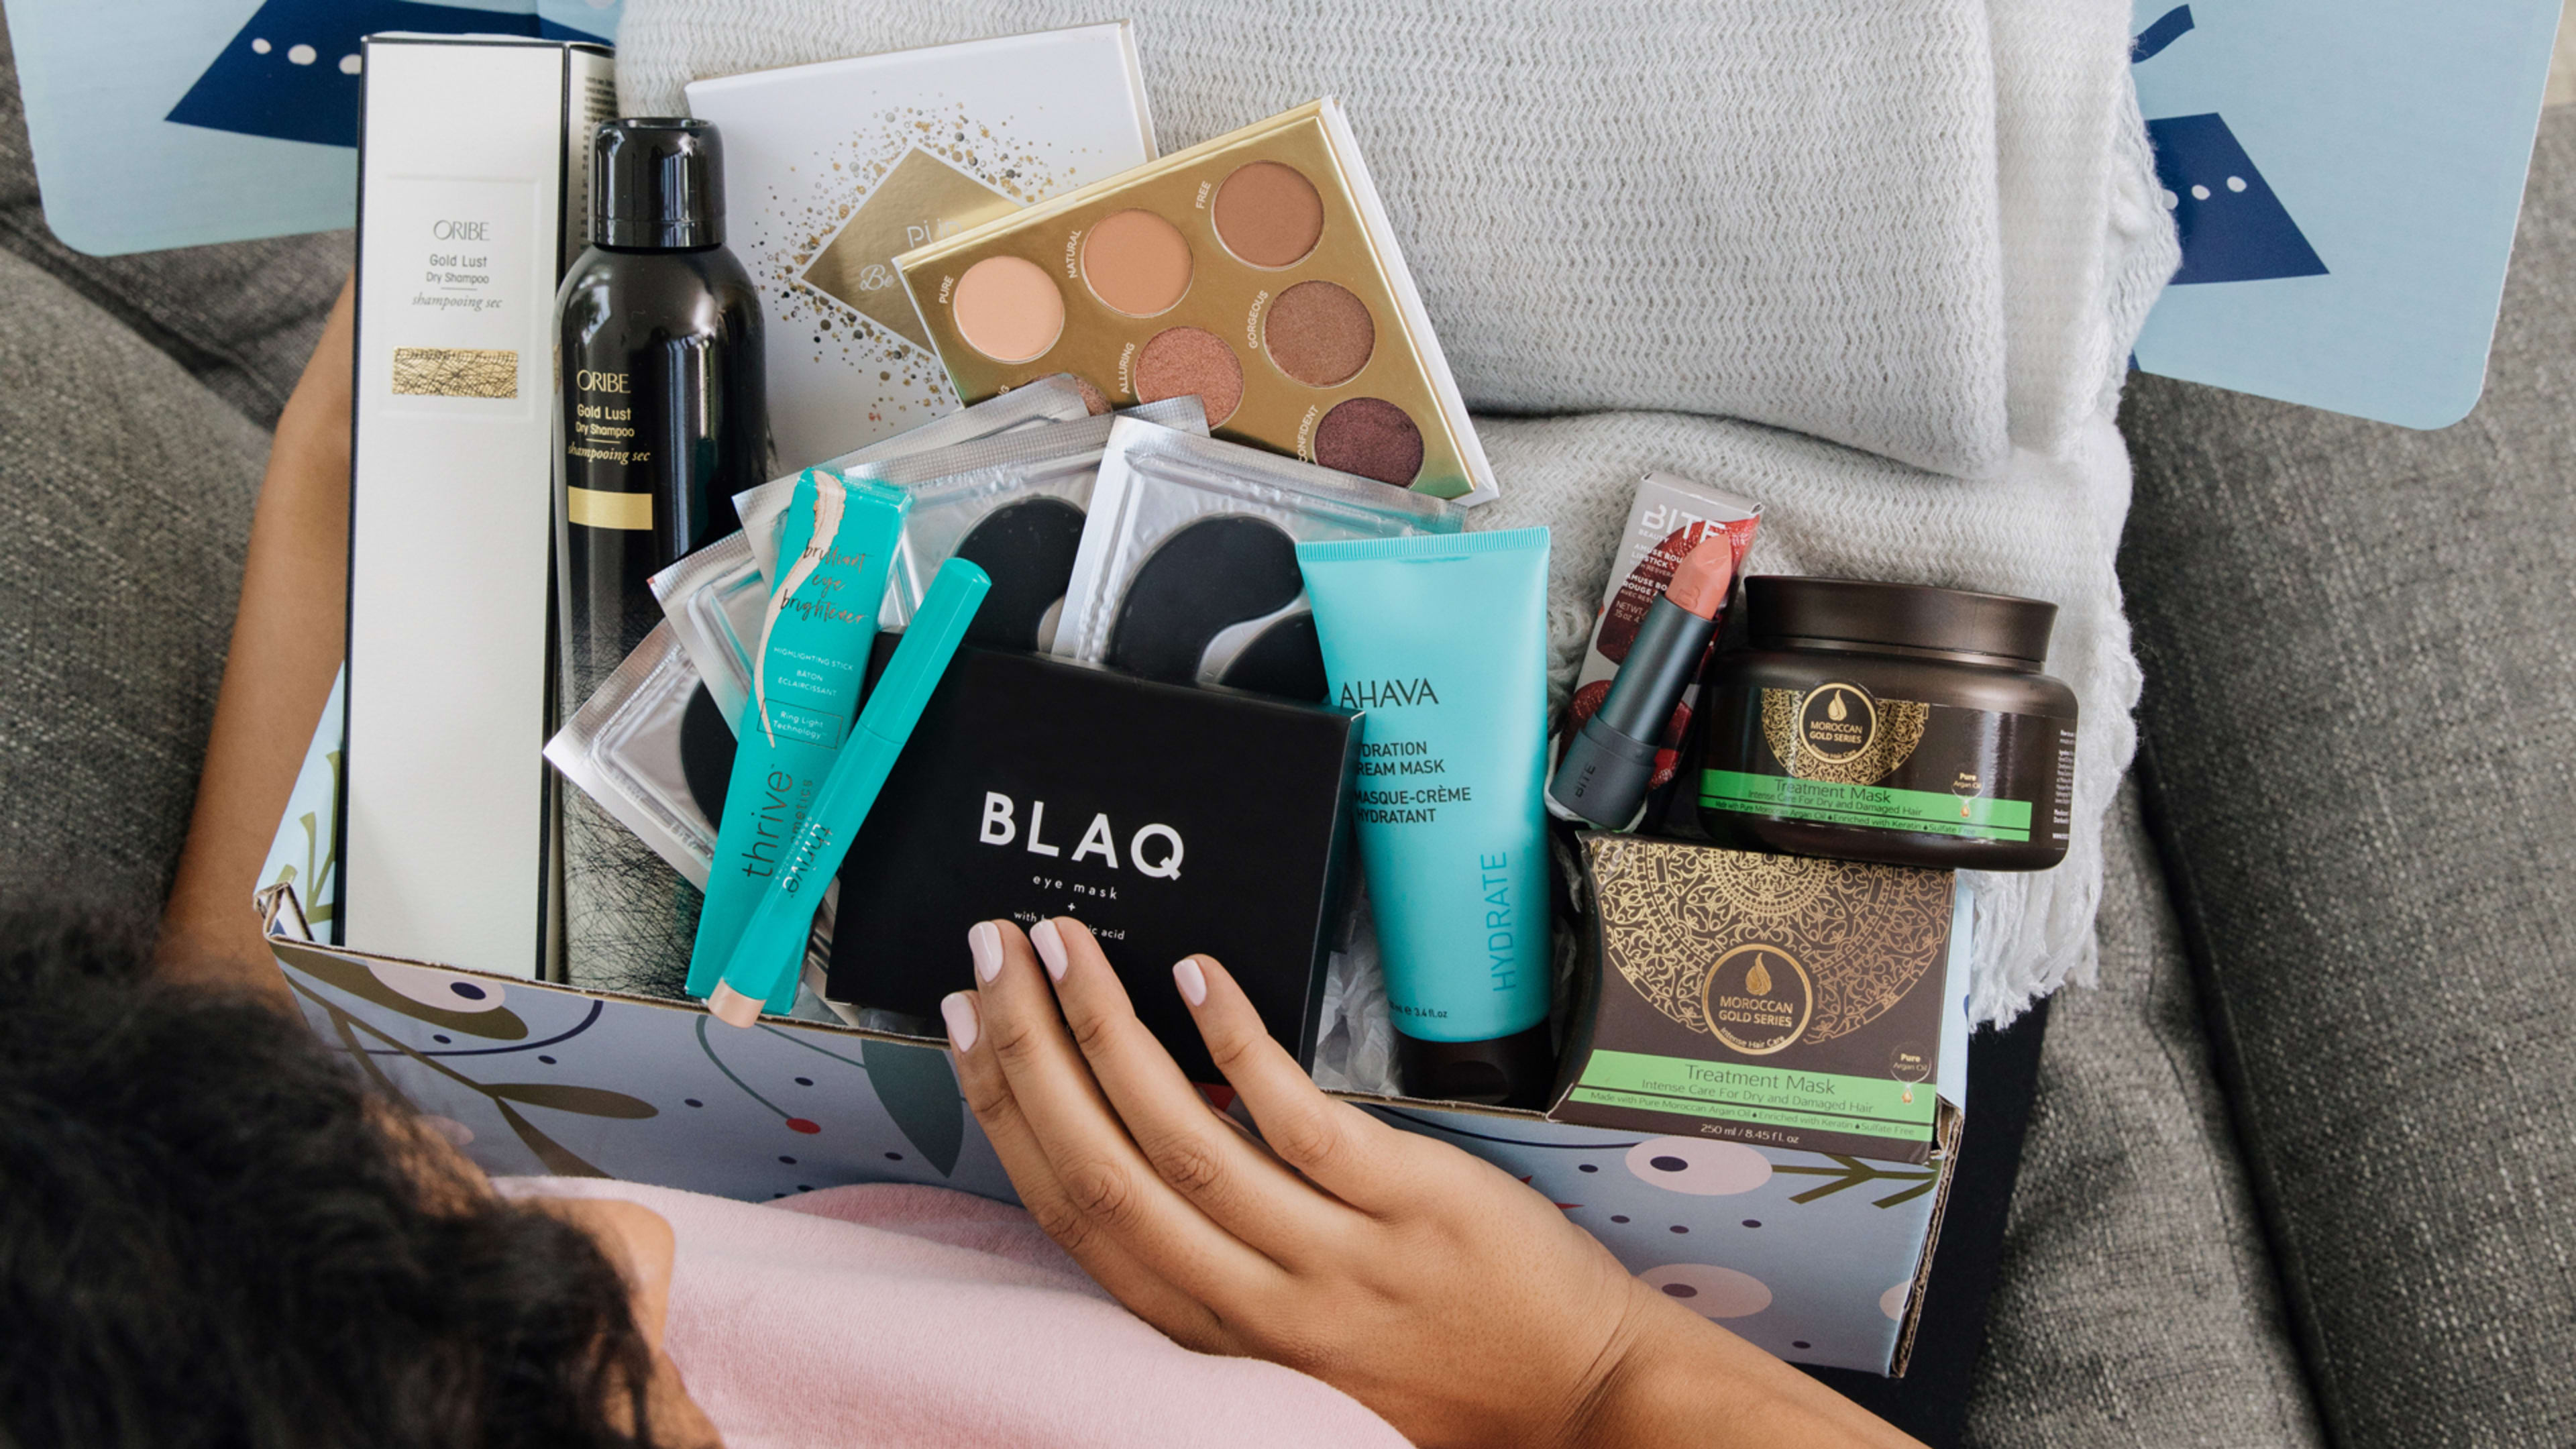 FabFitFun gets a whopping $80M to dominate the subscription box economy